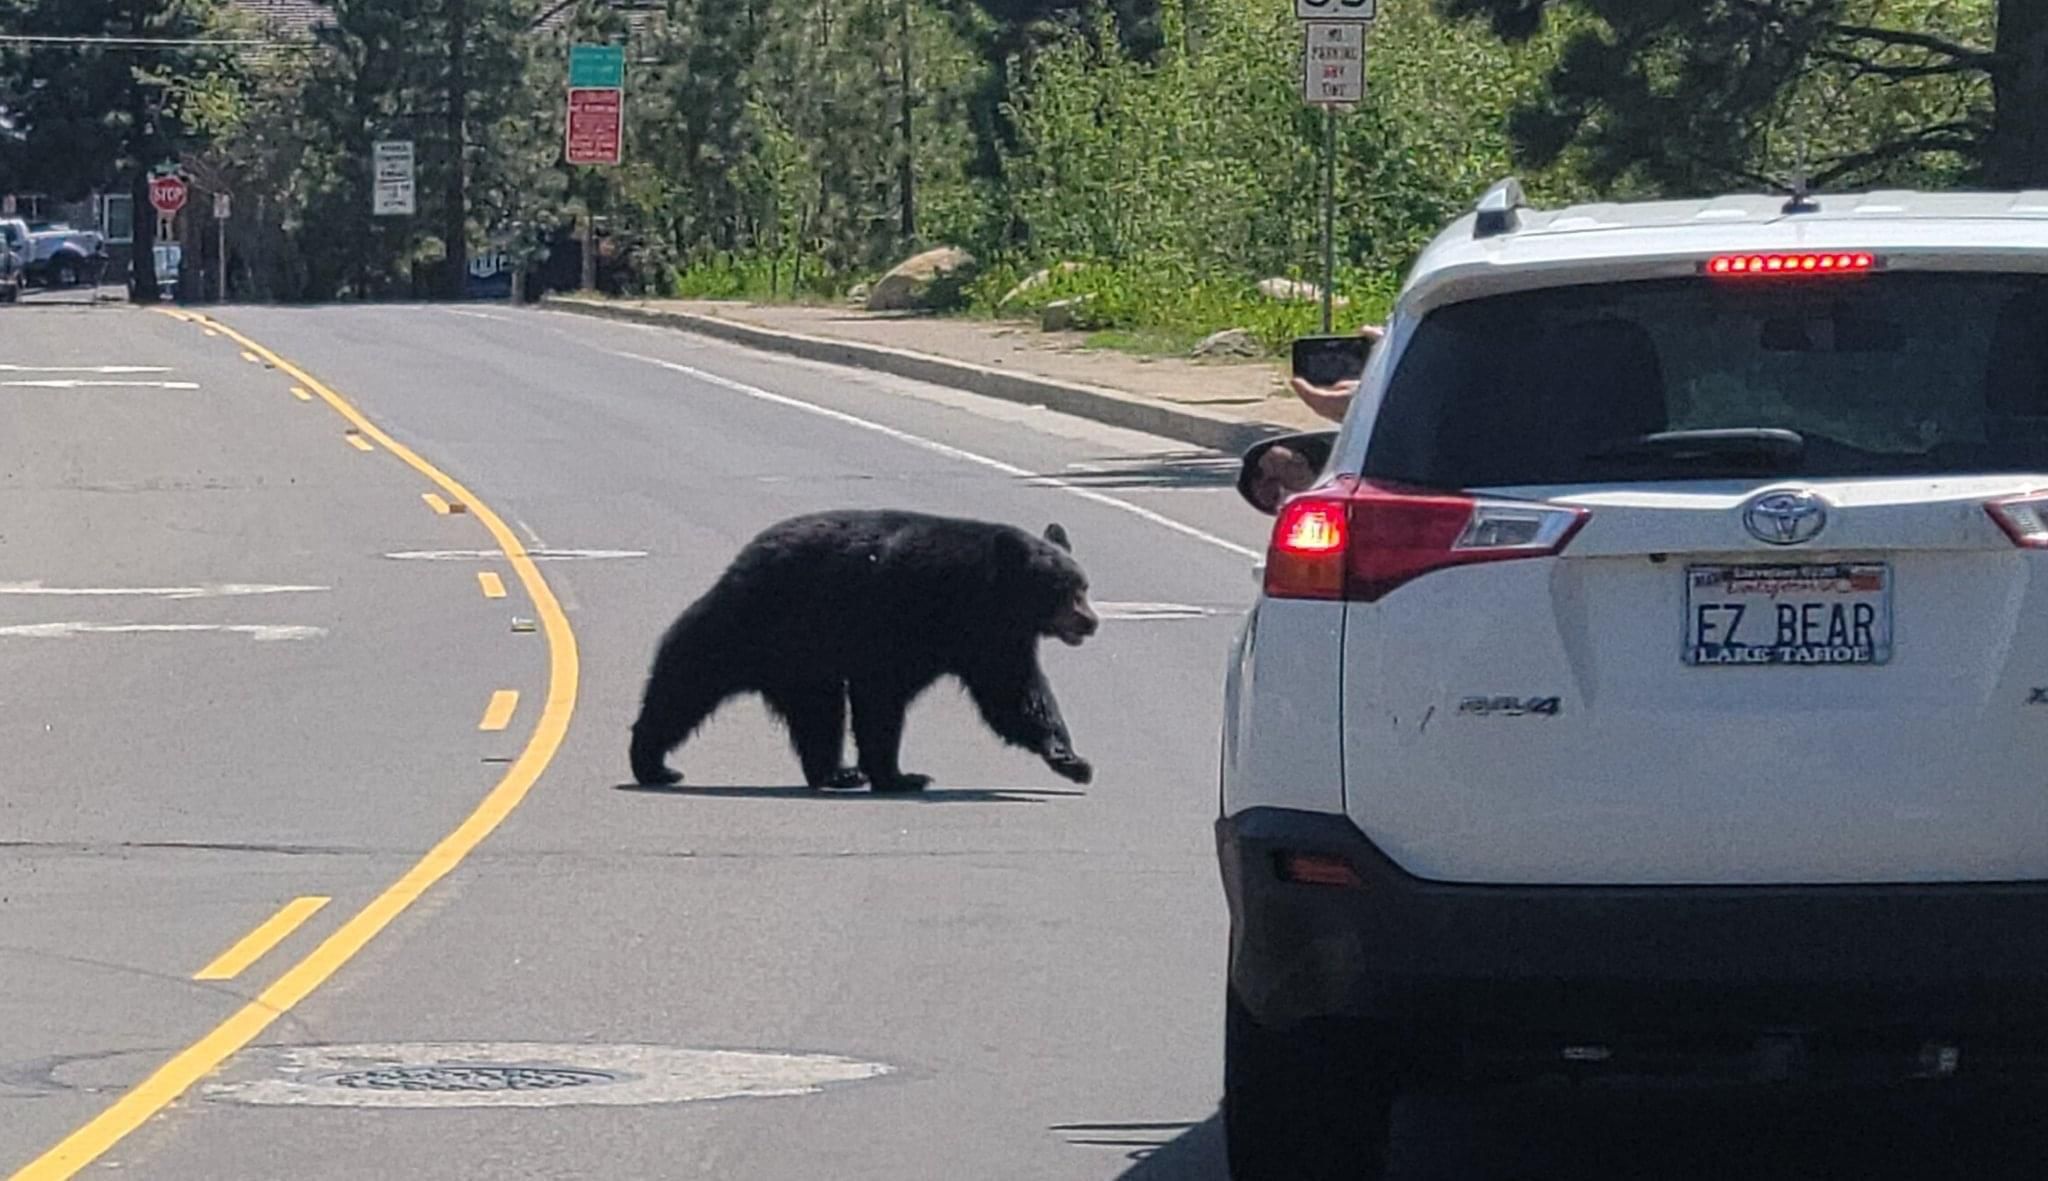 My mom caught this bear in front an appropriate license plate in Lake Tahoe